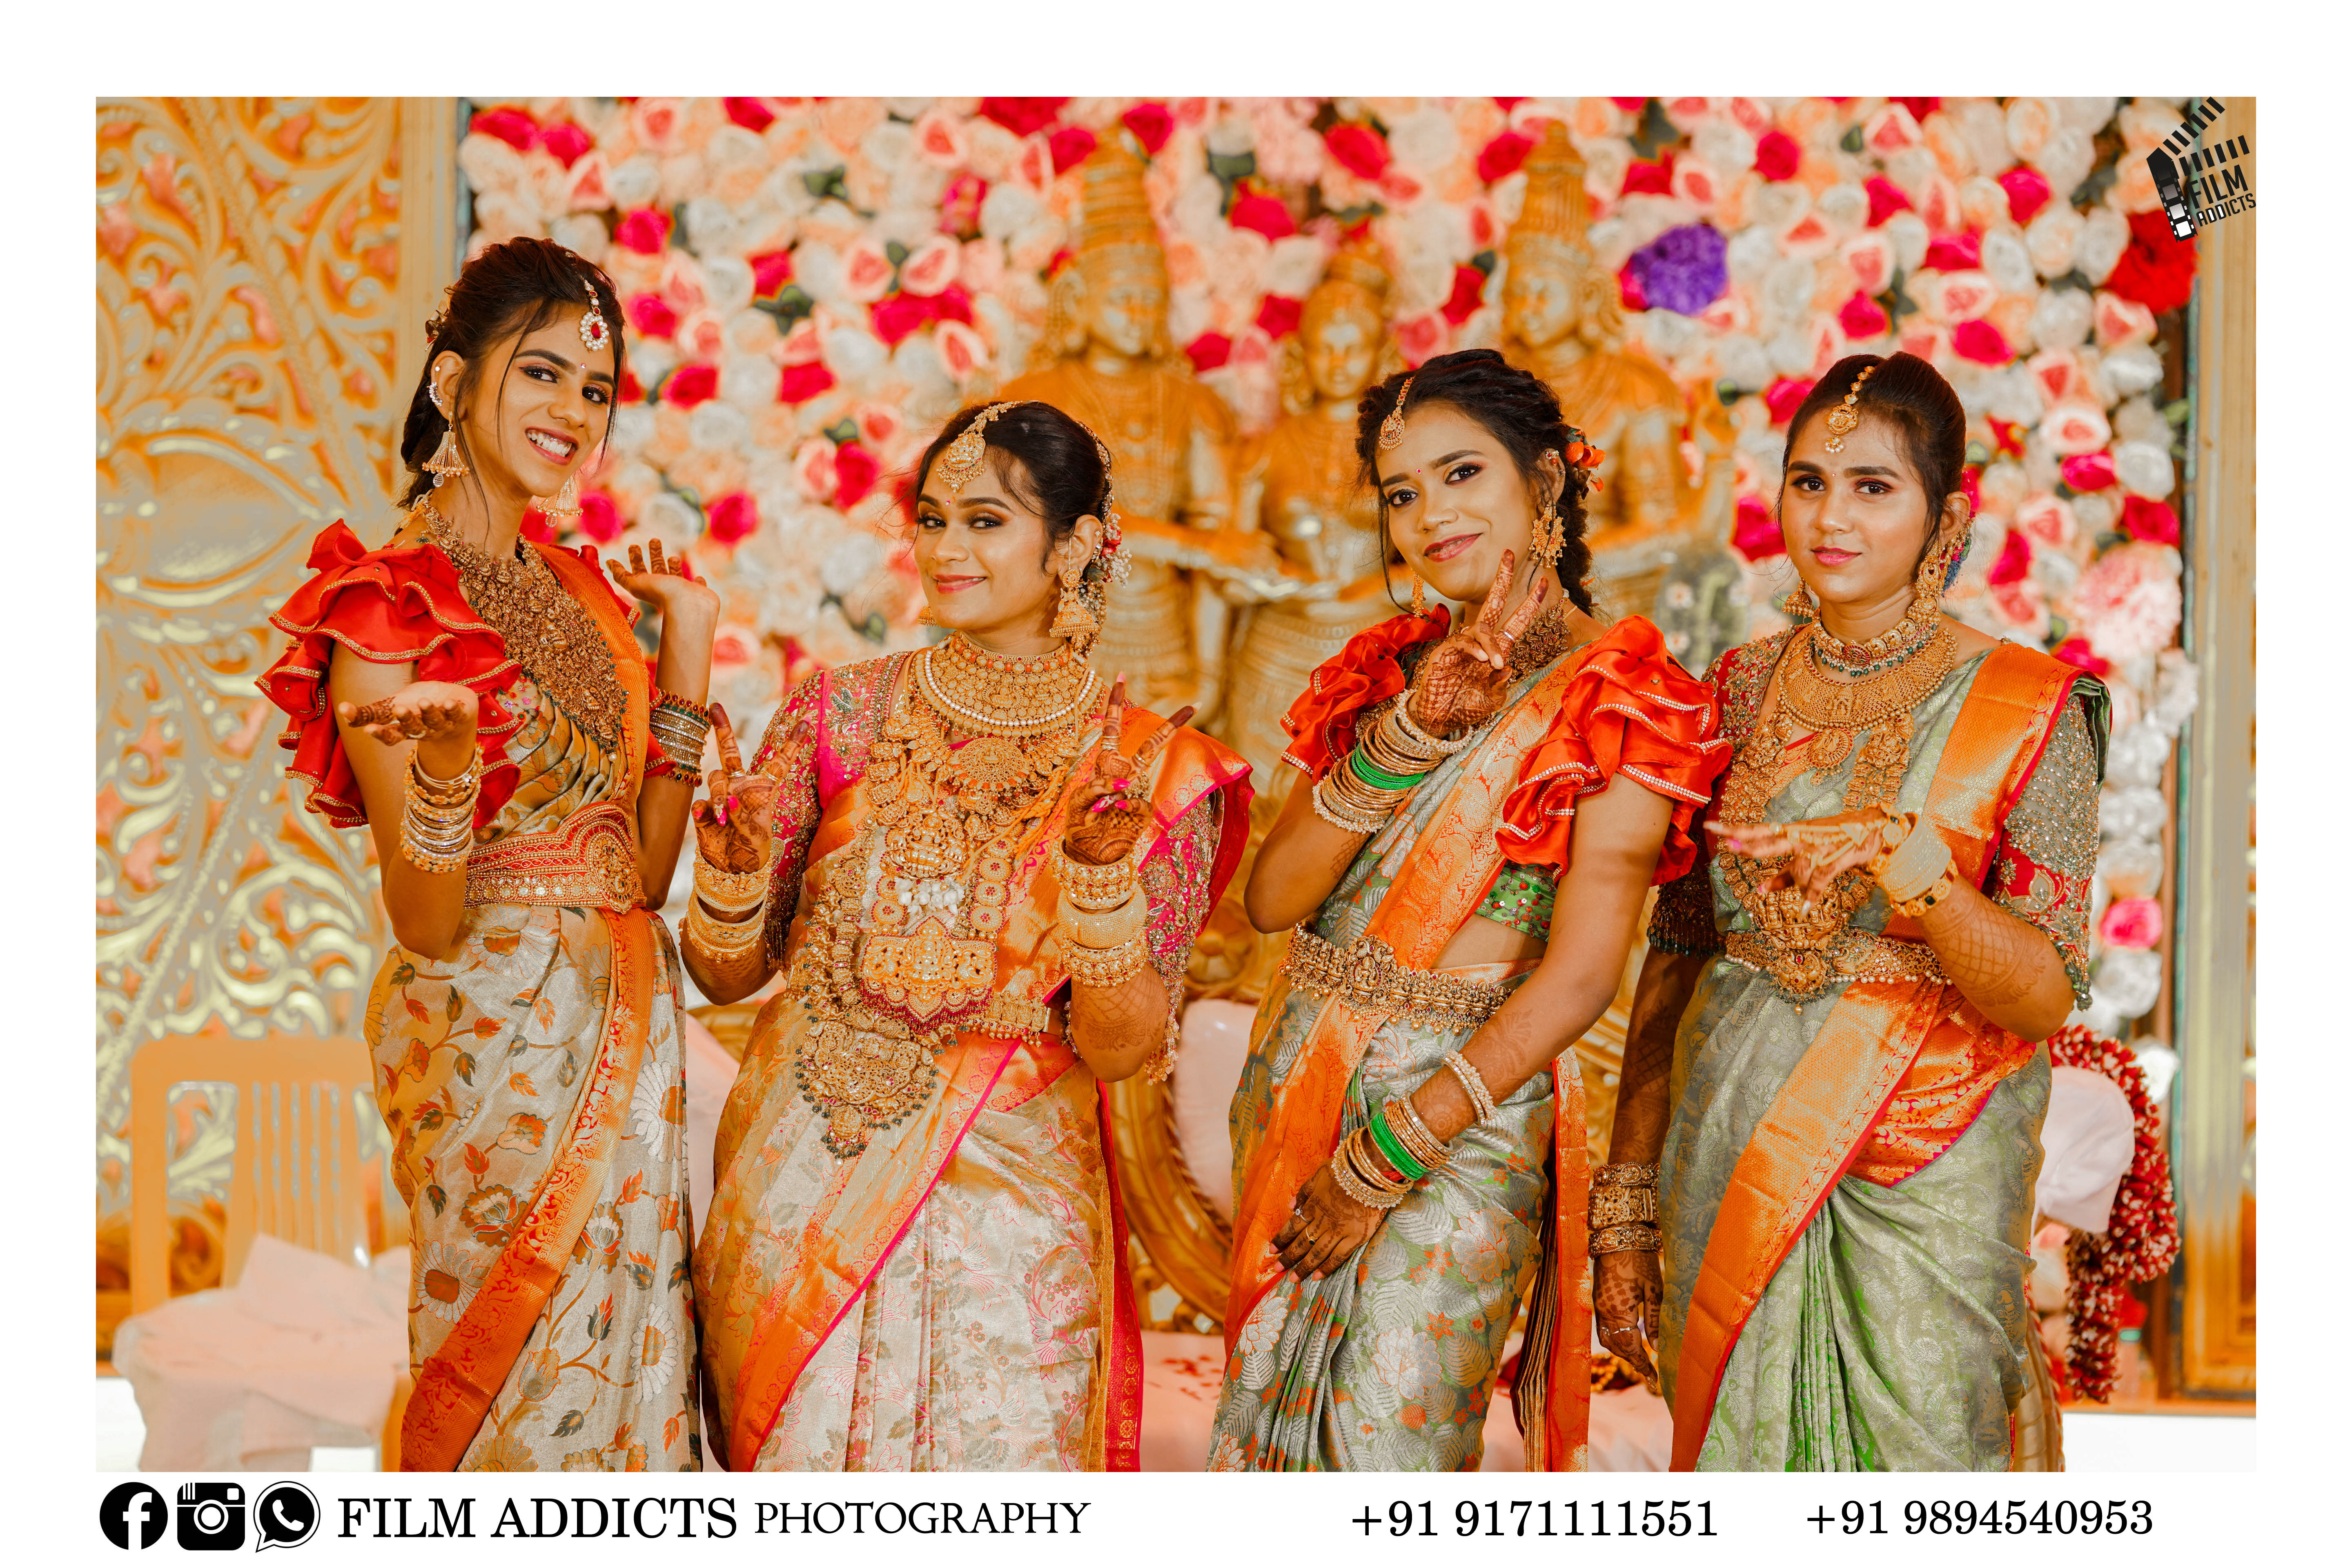 Best Candid Photographers in Sivaganga-FilmAddicts Photography, Best Candid photographers in sivagangai, Best wedding candid photographers in sivagangai, Best Photographers in sivagangai, Best Marraige photographers in sivagangai, Best wedding photography in sivagangai, Best wedding candid photography in sivagangai, Best Marraige photography in sivagangai, Best Photography in sivagangai, Best wedding video in sivagangai, Best wedding videography in sivagangai, Best Helicam operator in sivagangai, Best Drone Operator in sivagangai, Best wedding studio in sivagangai, Best proffesional photographers in sivagangai, No.1 Wedding Photographers in sivagangai, No.1 wedding photography in sivagangai, sivagangai wedding photographers, sivagangai wedding photography, sivagangai wedding Videos in sivagangai,Best Wedding photographers in Madurai, Best Candid photographers in Madurai, Best wedding candid photographers in Madurai, Best Photographers in Madurai,Best Marraige photographers in Madurai,Best wedding photography in Madurai, Best wedding candid photography in Madurai, Best Marraige photography in Madurai, Best Photography in Madurai, Best wedding video in Madurai, Best wedding videography in Madurai, Best Helicam operator in Madurai, Best Drone Operator in Madurai, Best wedding studio in Madurai, Best proffesional photographers in Madurai, No.1 Wedding Photographers in Madurai, No.1 wedding photography in Madurai, Madurai wedding photographers, Madurai wedding photography, Madurai wedding Videos in Madurai, Best Wedding photographers in TamilNadu.